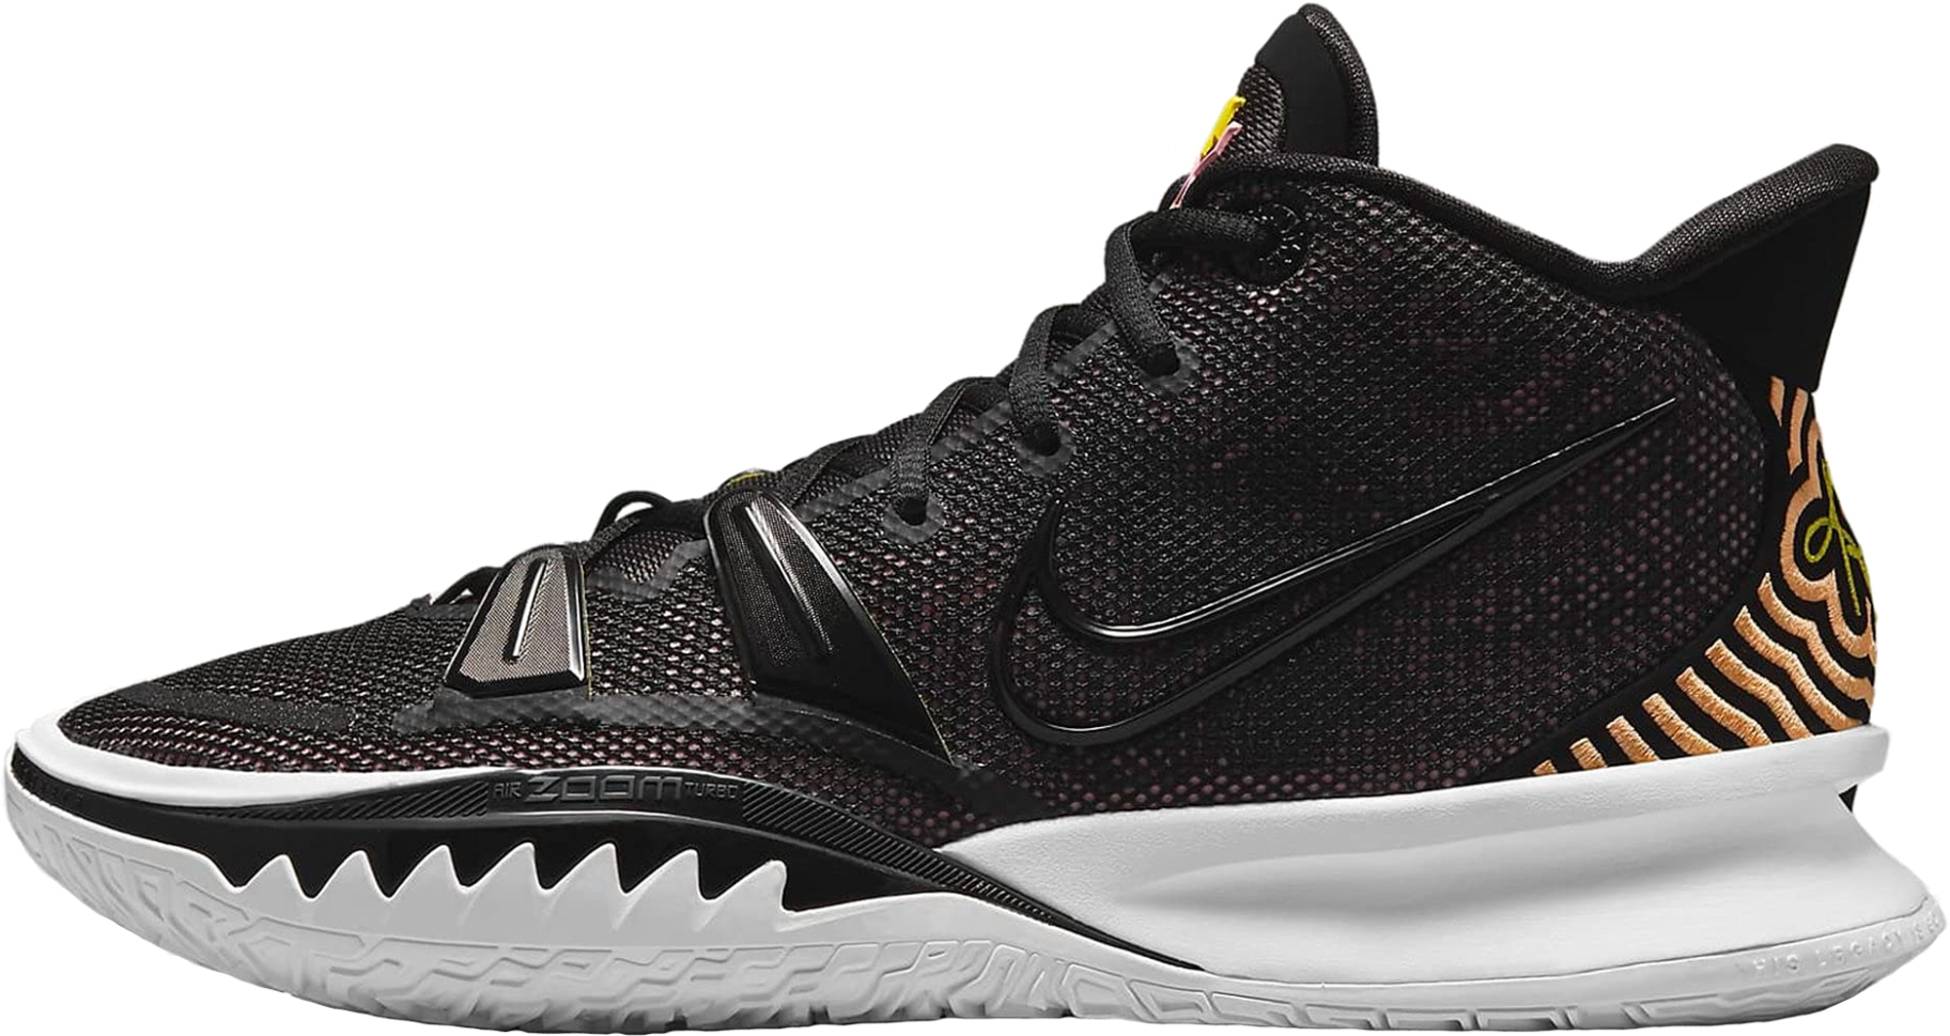 kyrie irving shoes for women